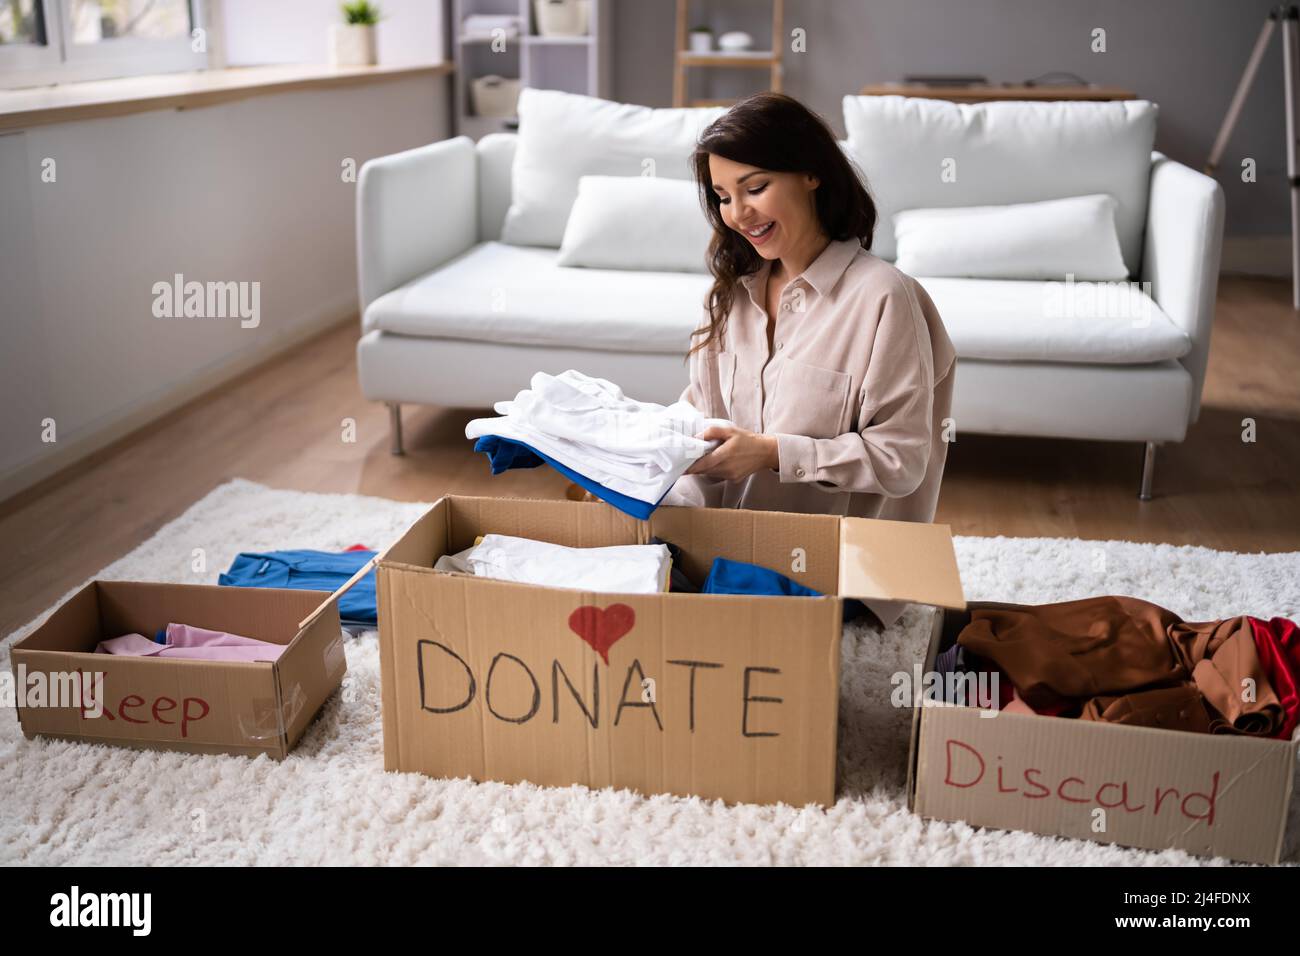 Donating Decluttering And Cleaning Up Wardrobe Clothes Stock Photo